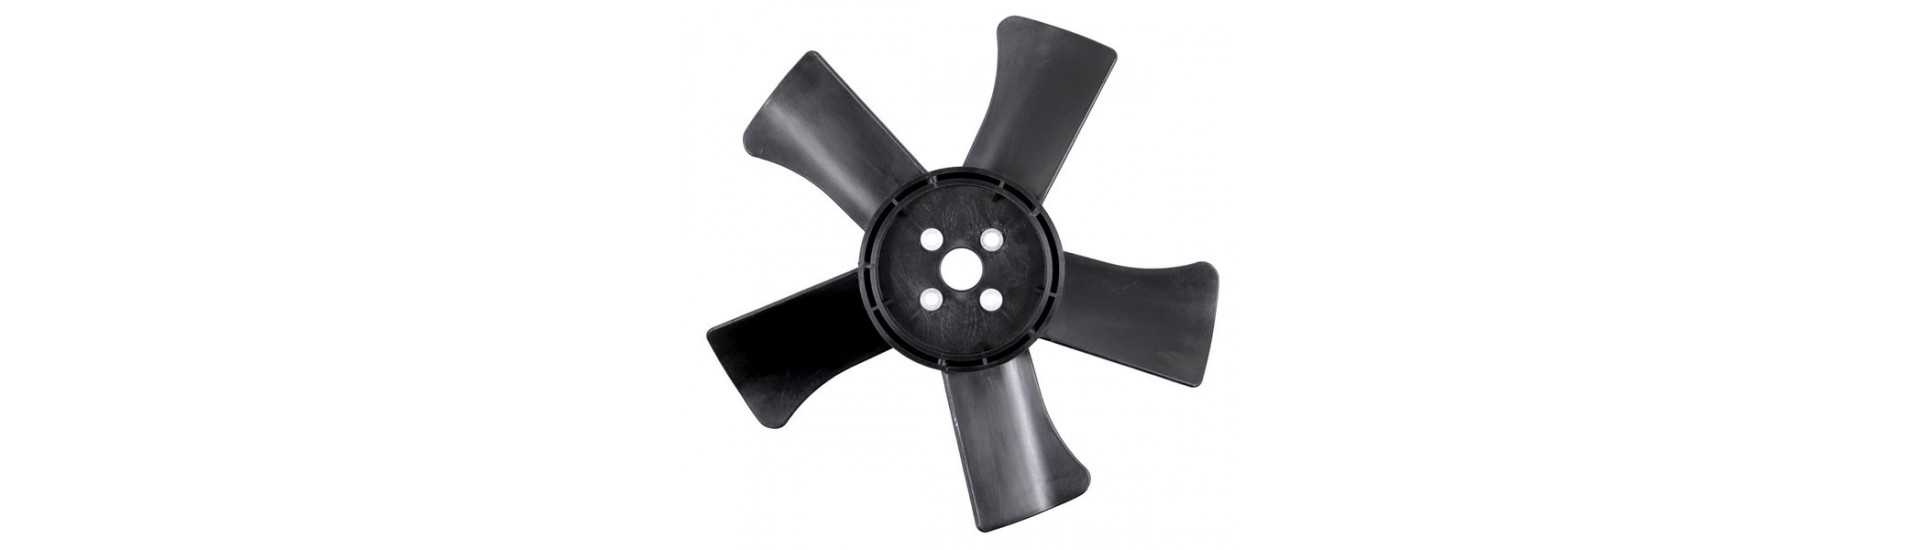 Ventilator and propeller at the best price for car without a permit